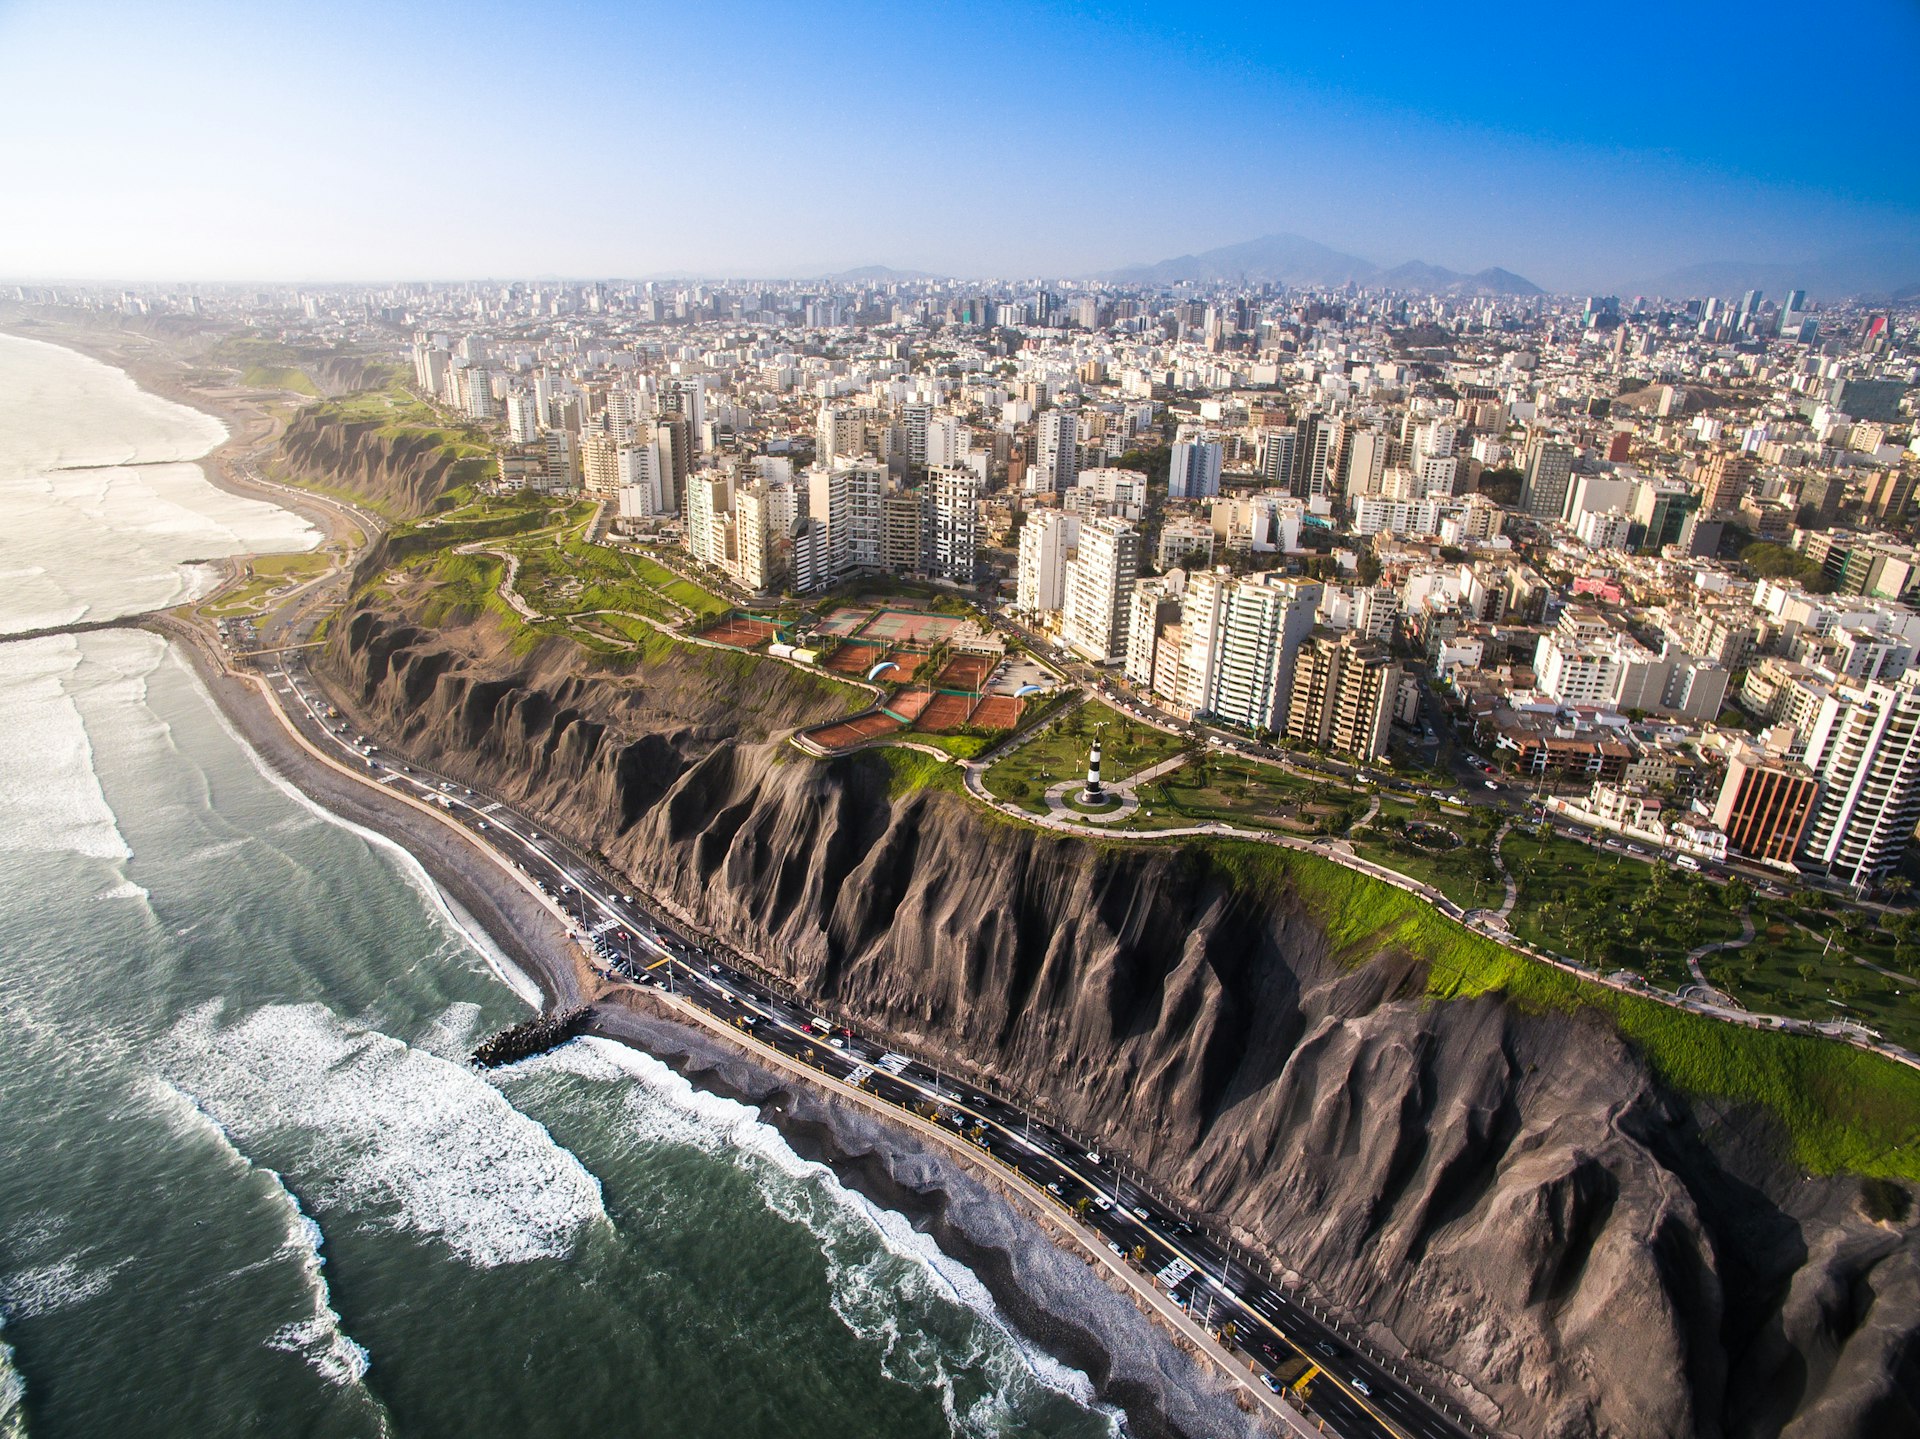 Panoramic view of Lima from Miraflores, with waves breaking on the beach